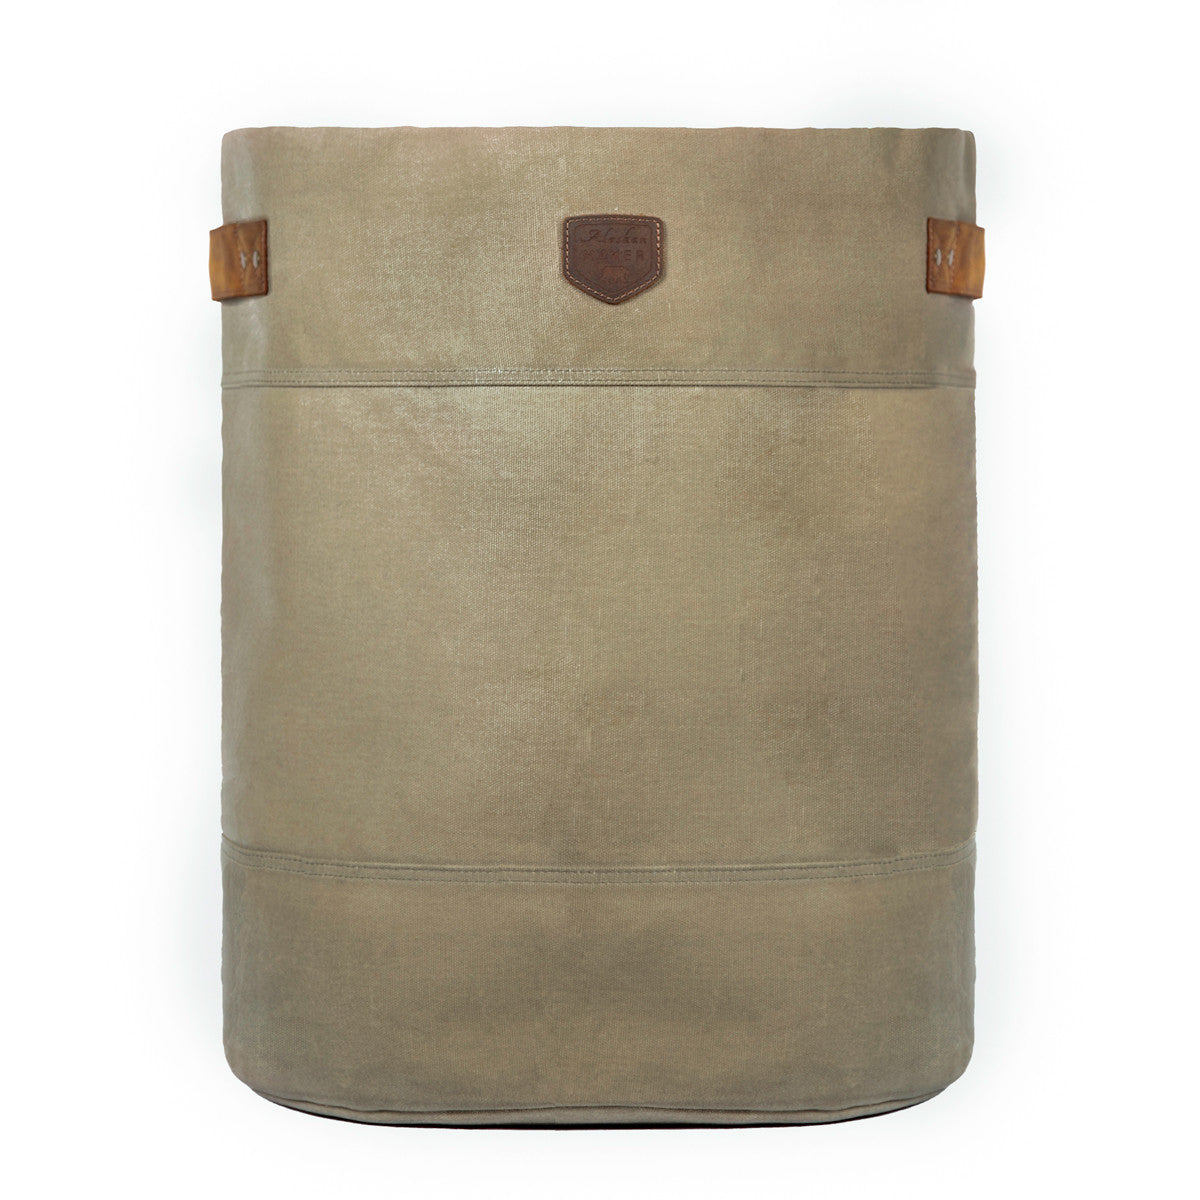 Waxed canvas storage shelter bag